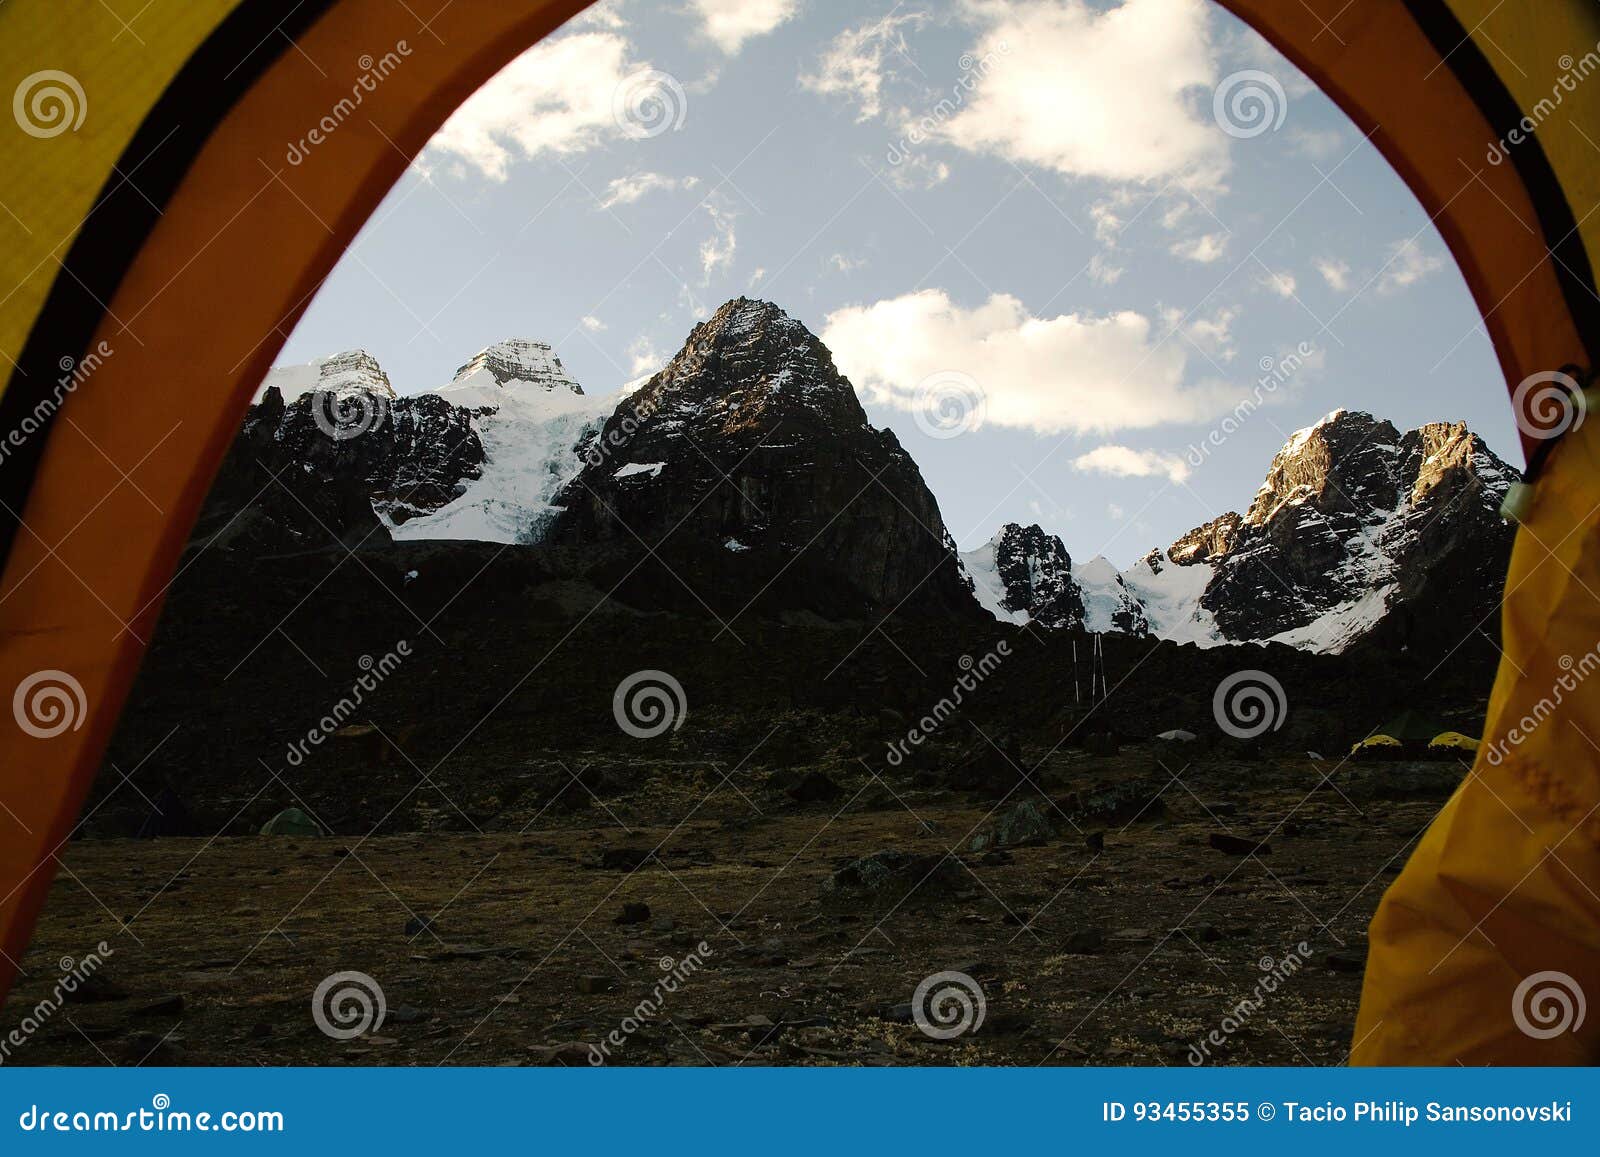 cabeza del condor mountains seen from basecamp inside tent